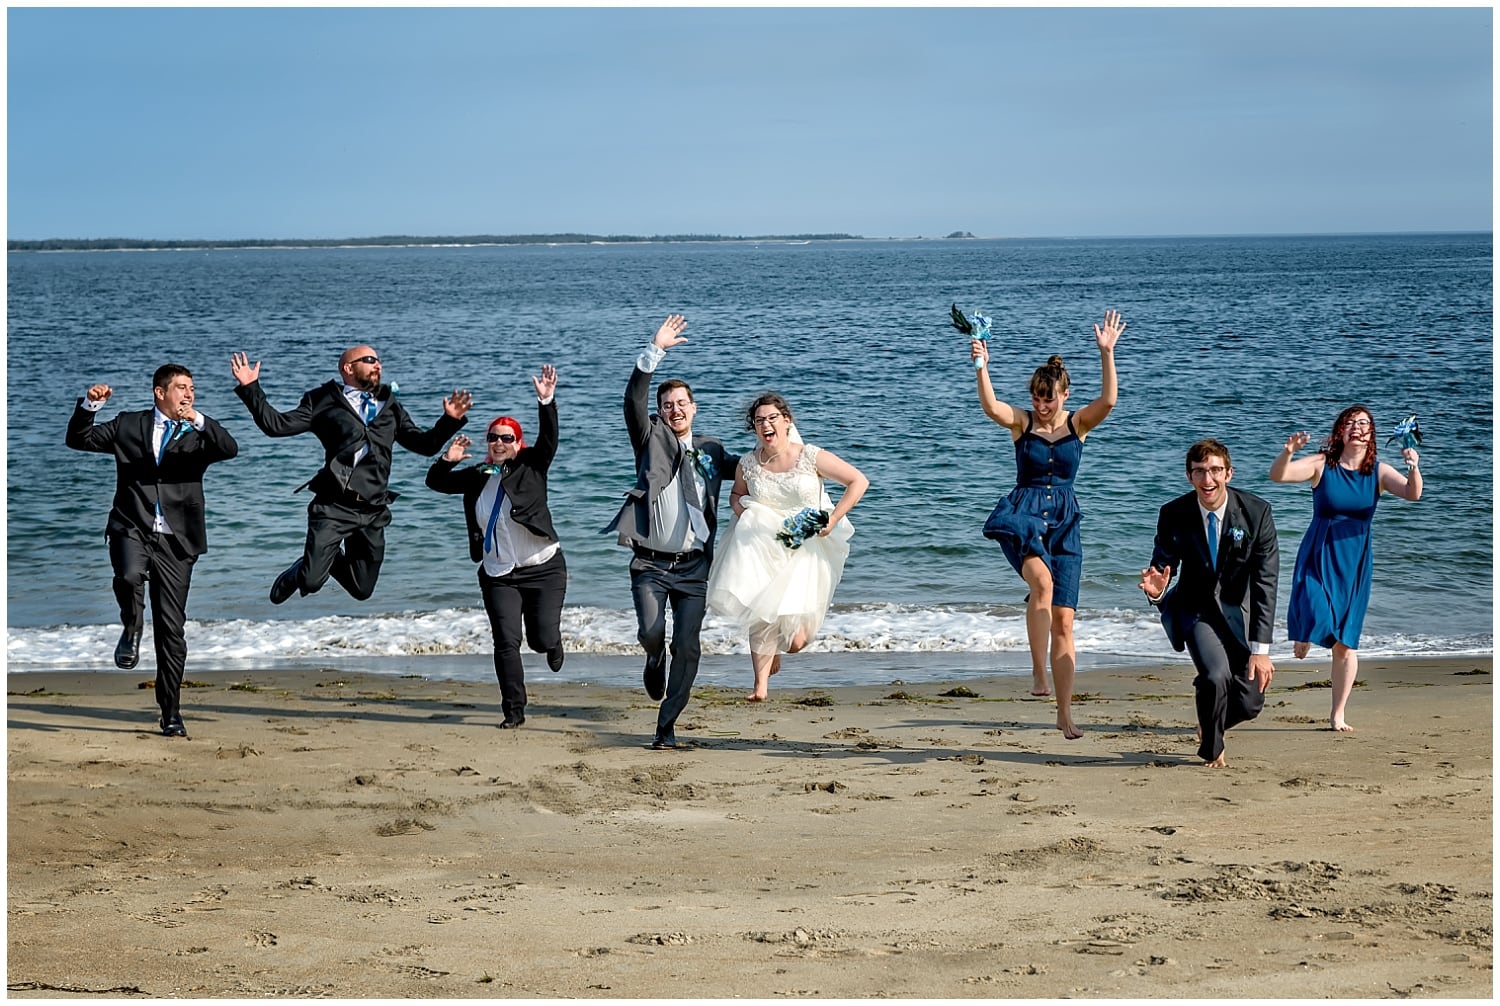 The entire wedding party run across the beach and jump into the air during a beach wedding in Green Bay NS.